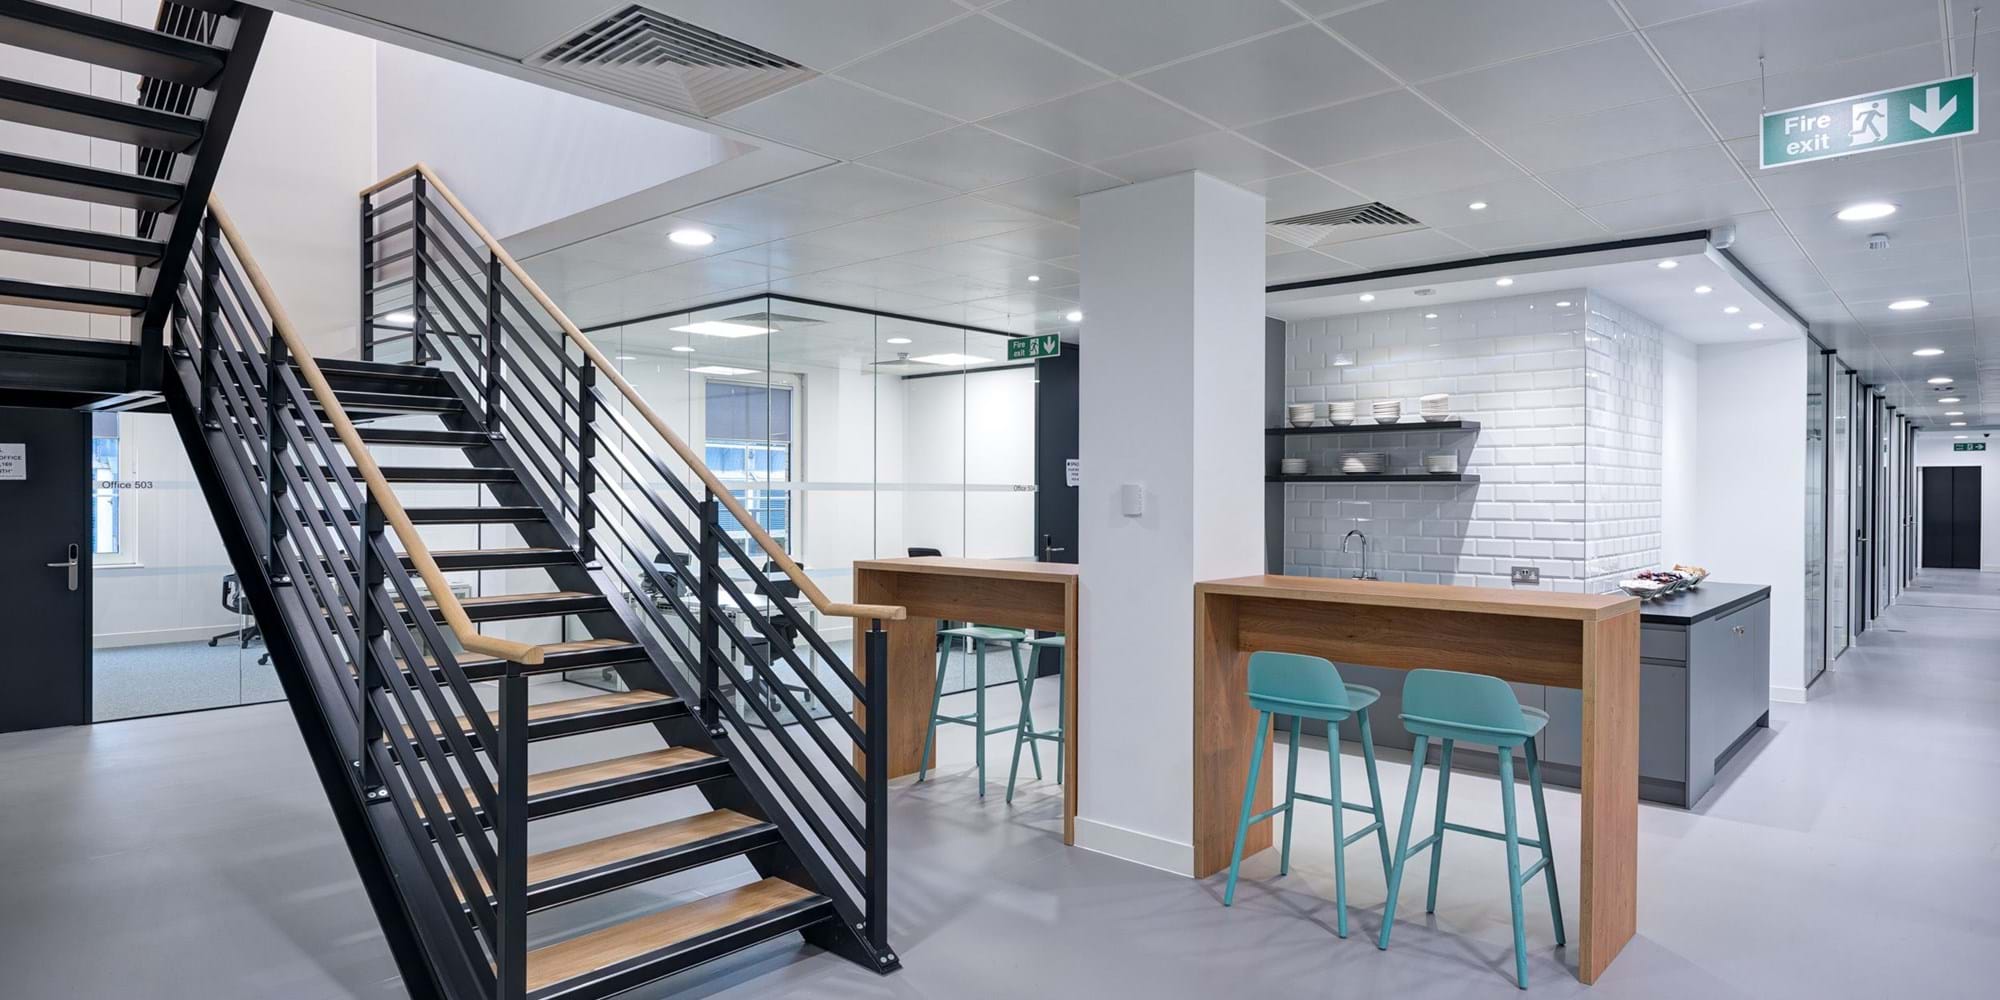 Modus Workspace office design, fit out and refurbishment - Spaces - Brighton - Spaces Brighton 27 highres sRGB.jpg